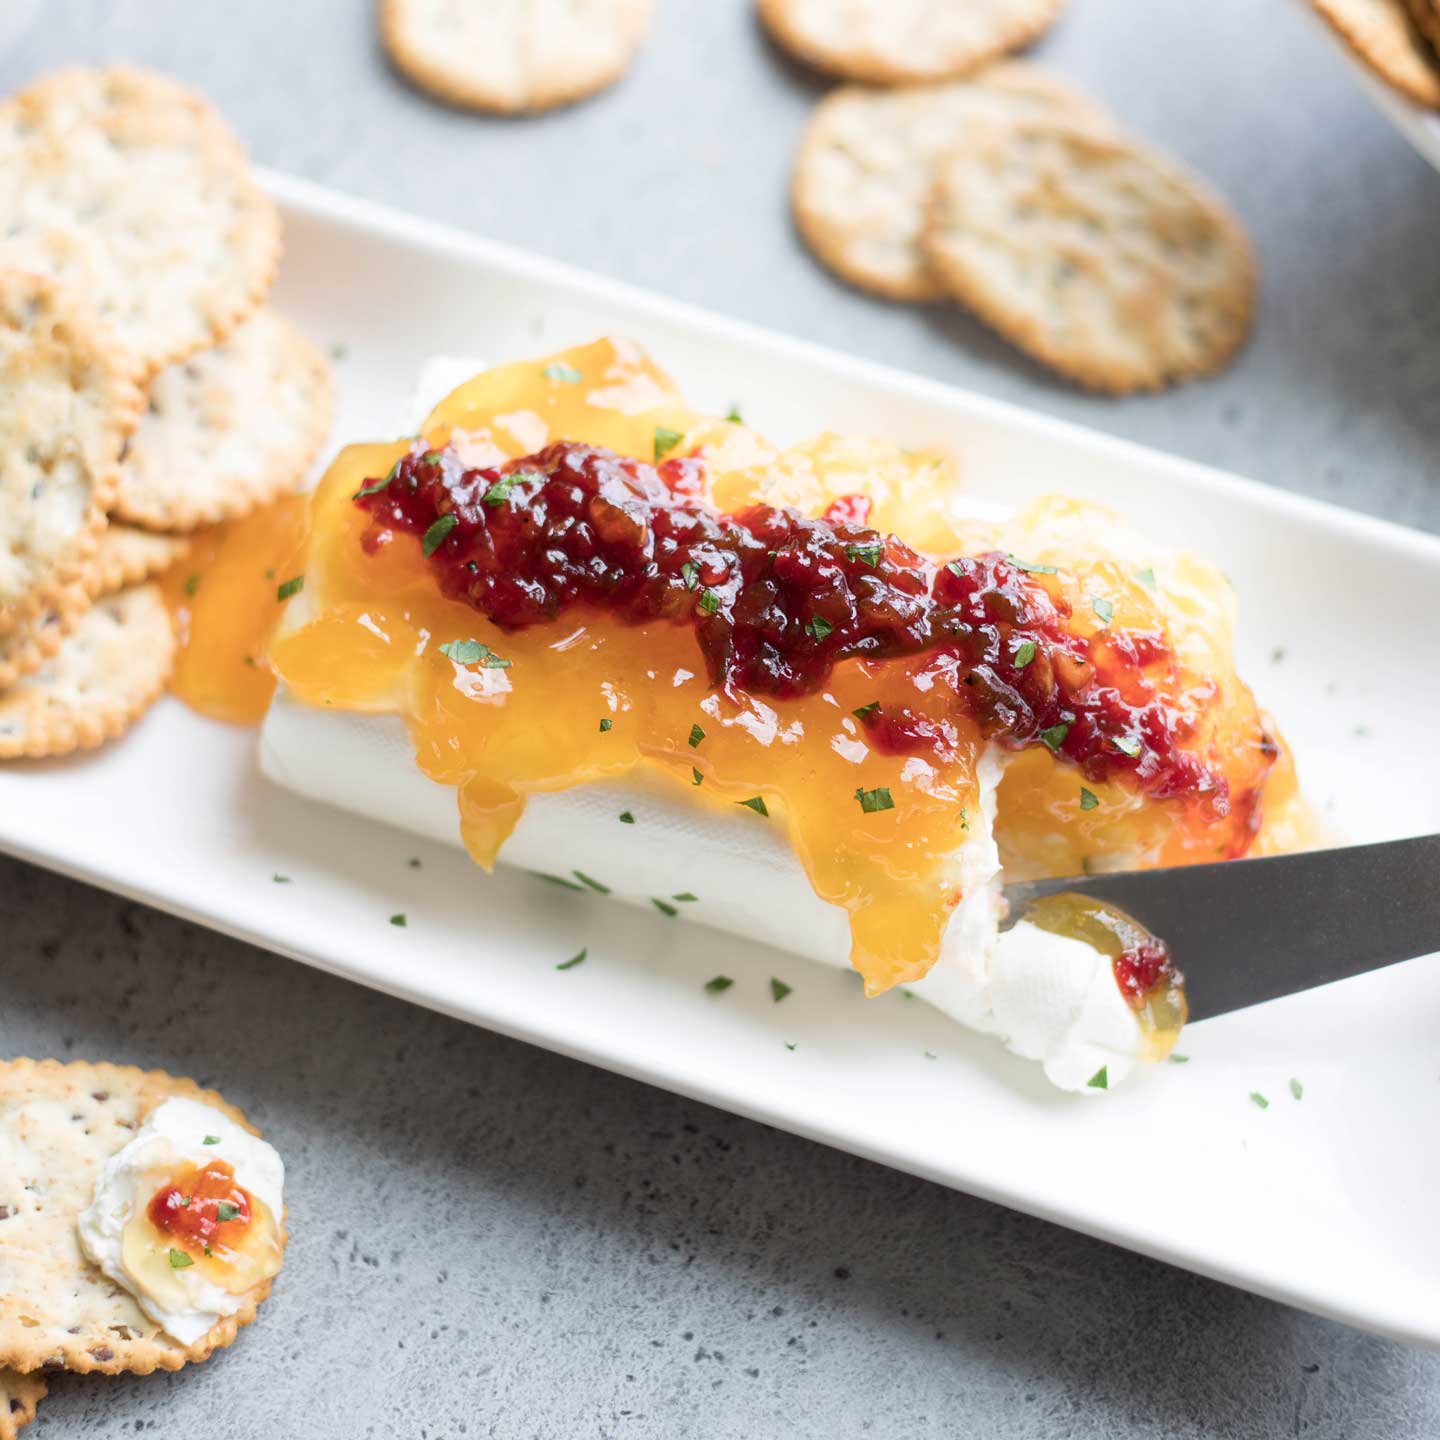 Everyone LOVES this dip and asks for the recipe! This Sweet & Spicy Cream Cheese Dip appetizer quickly disappears, every time! Just keep a few ingredients on hand, and it’s a total snap to throw together (like ... 3 minutes flat)! Great for picnics and potlucks, tailgates and sports parties - even as a fancy, finger-food appetizer (we've got tips for that)! | cream cheese recipes | cream cheese appetizer easy | pepper jelly and cream cheese | appetizers for party | www.twohealthykitchens.com